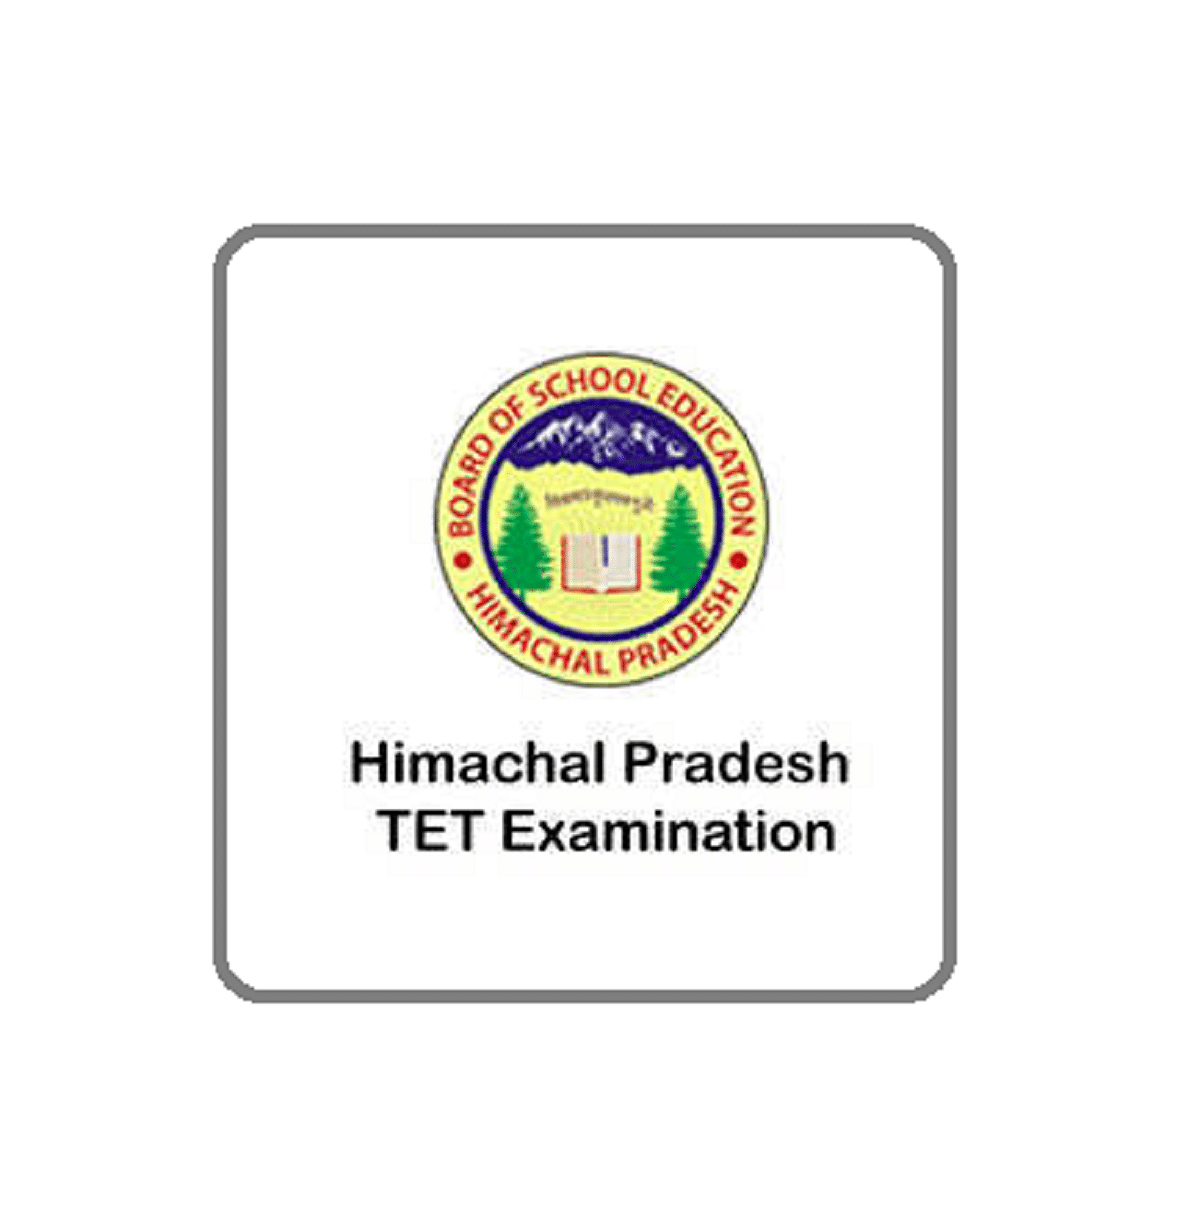 HP TET 2019 in November: Last Day to Apply Today,